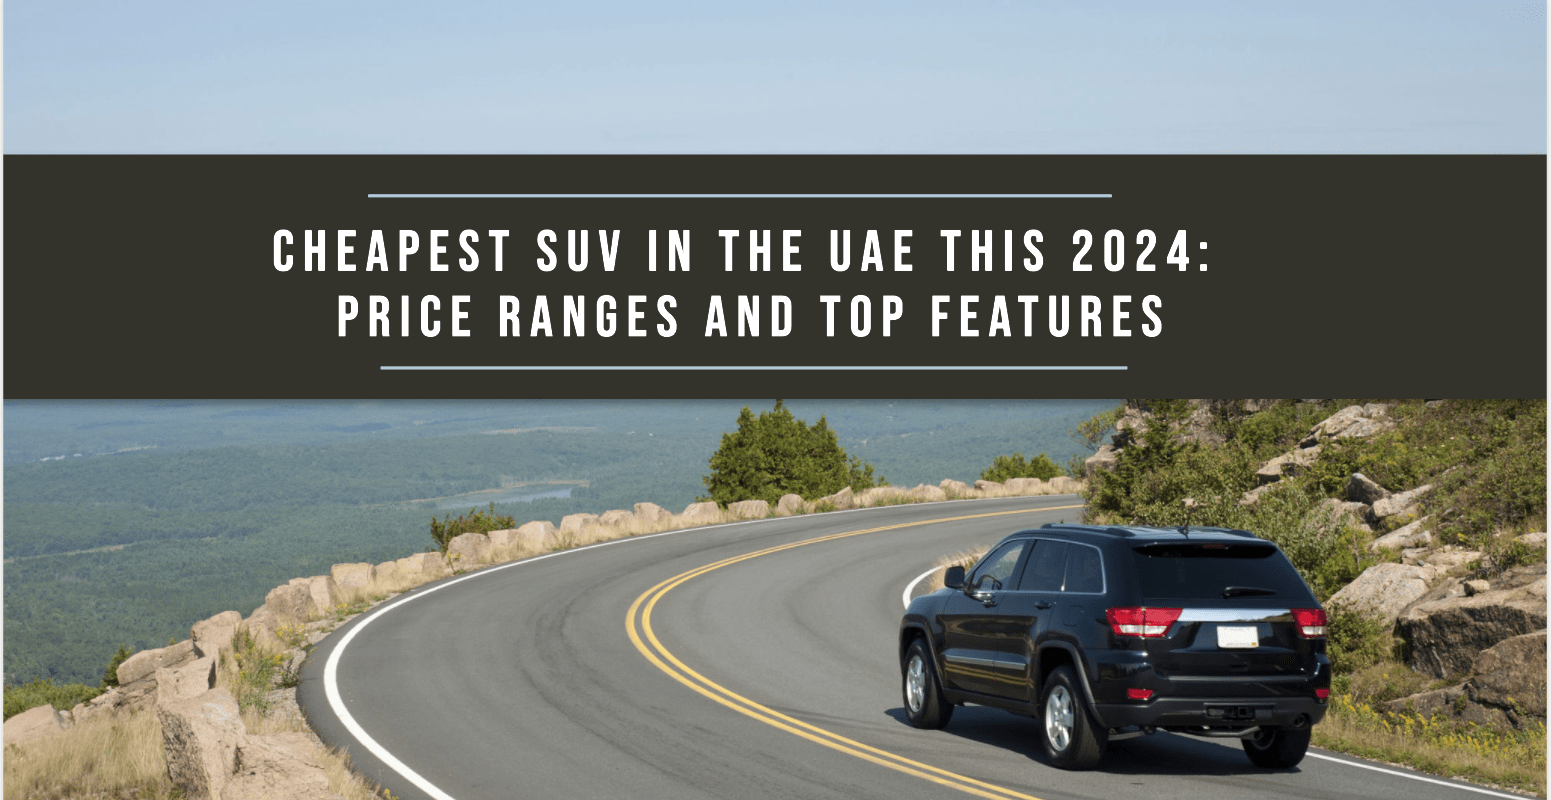 Cheapest SUV in the UAE